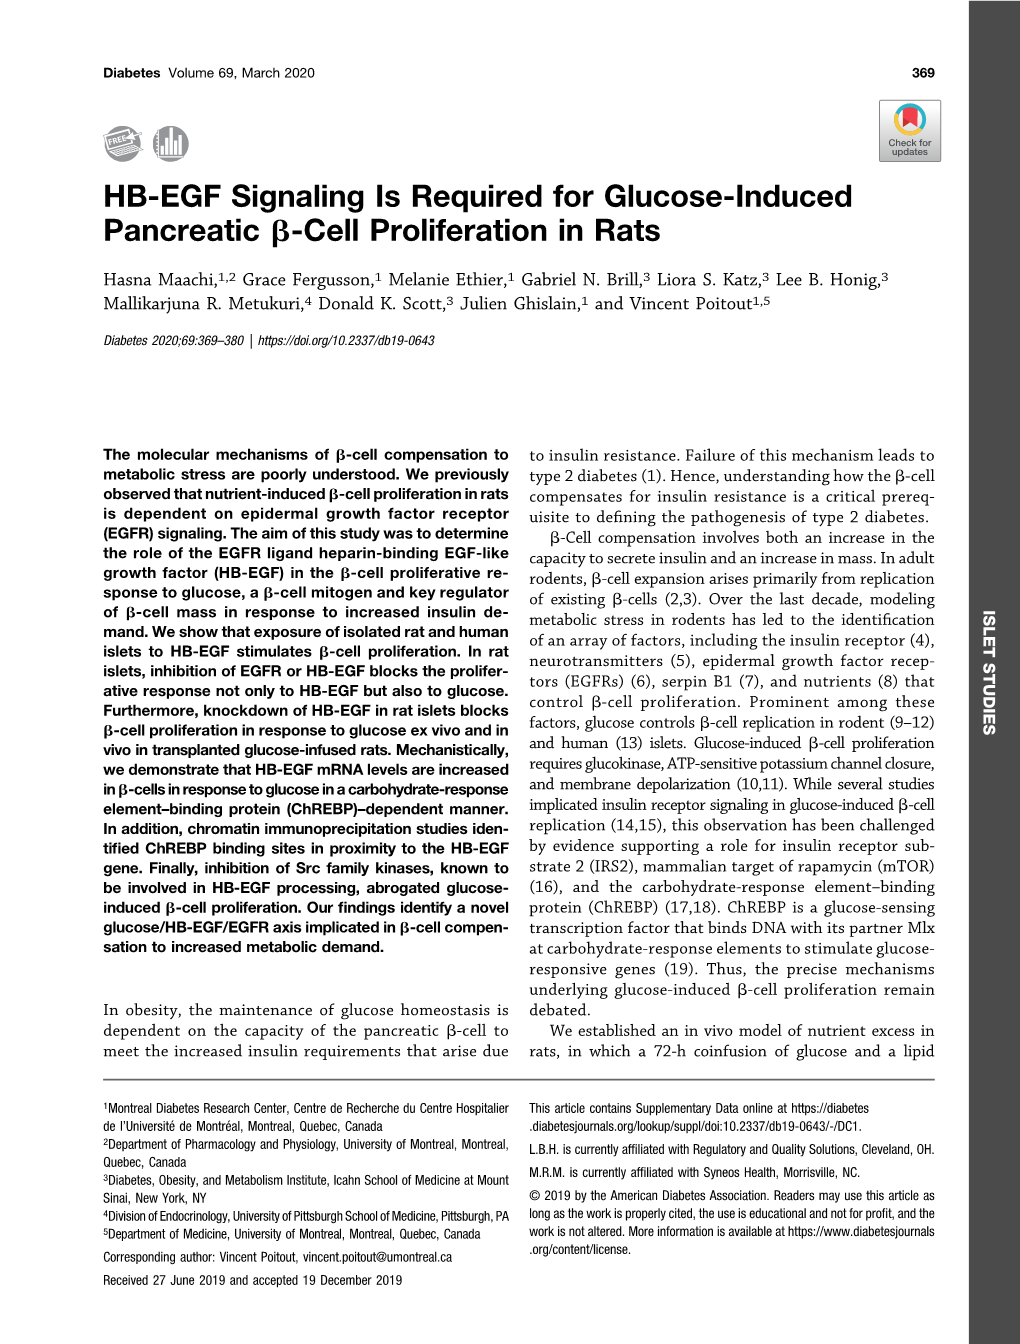 HB-EGF Signaling Is Required for Glucose-Induced Pancreatic Β-Cell